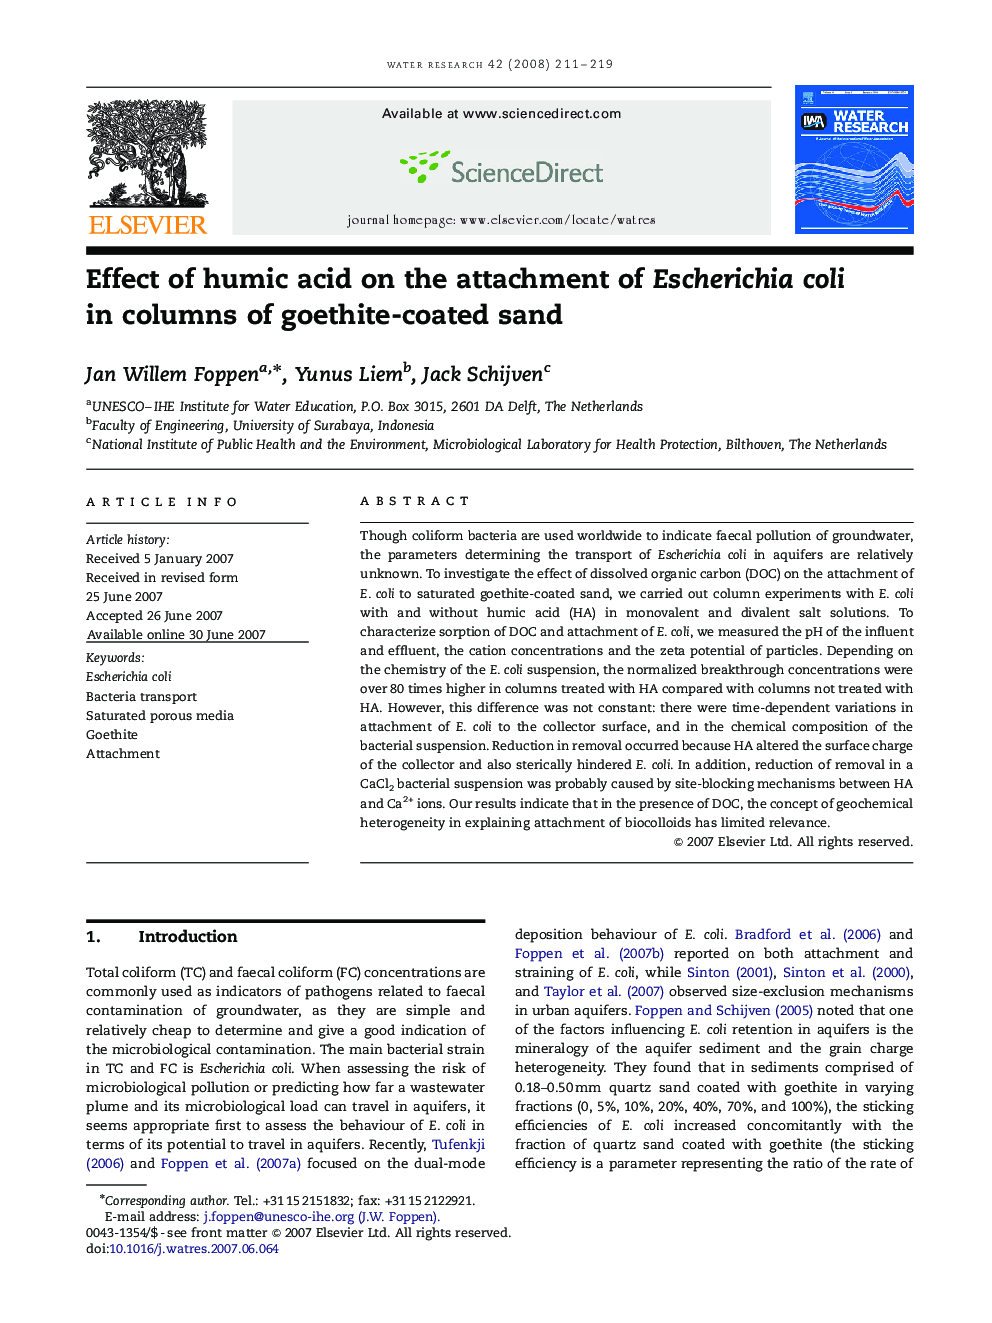 Effect of humic acid on the attachment of Escherichia coli in columns of goethite-coated sand